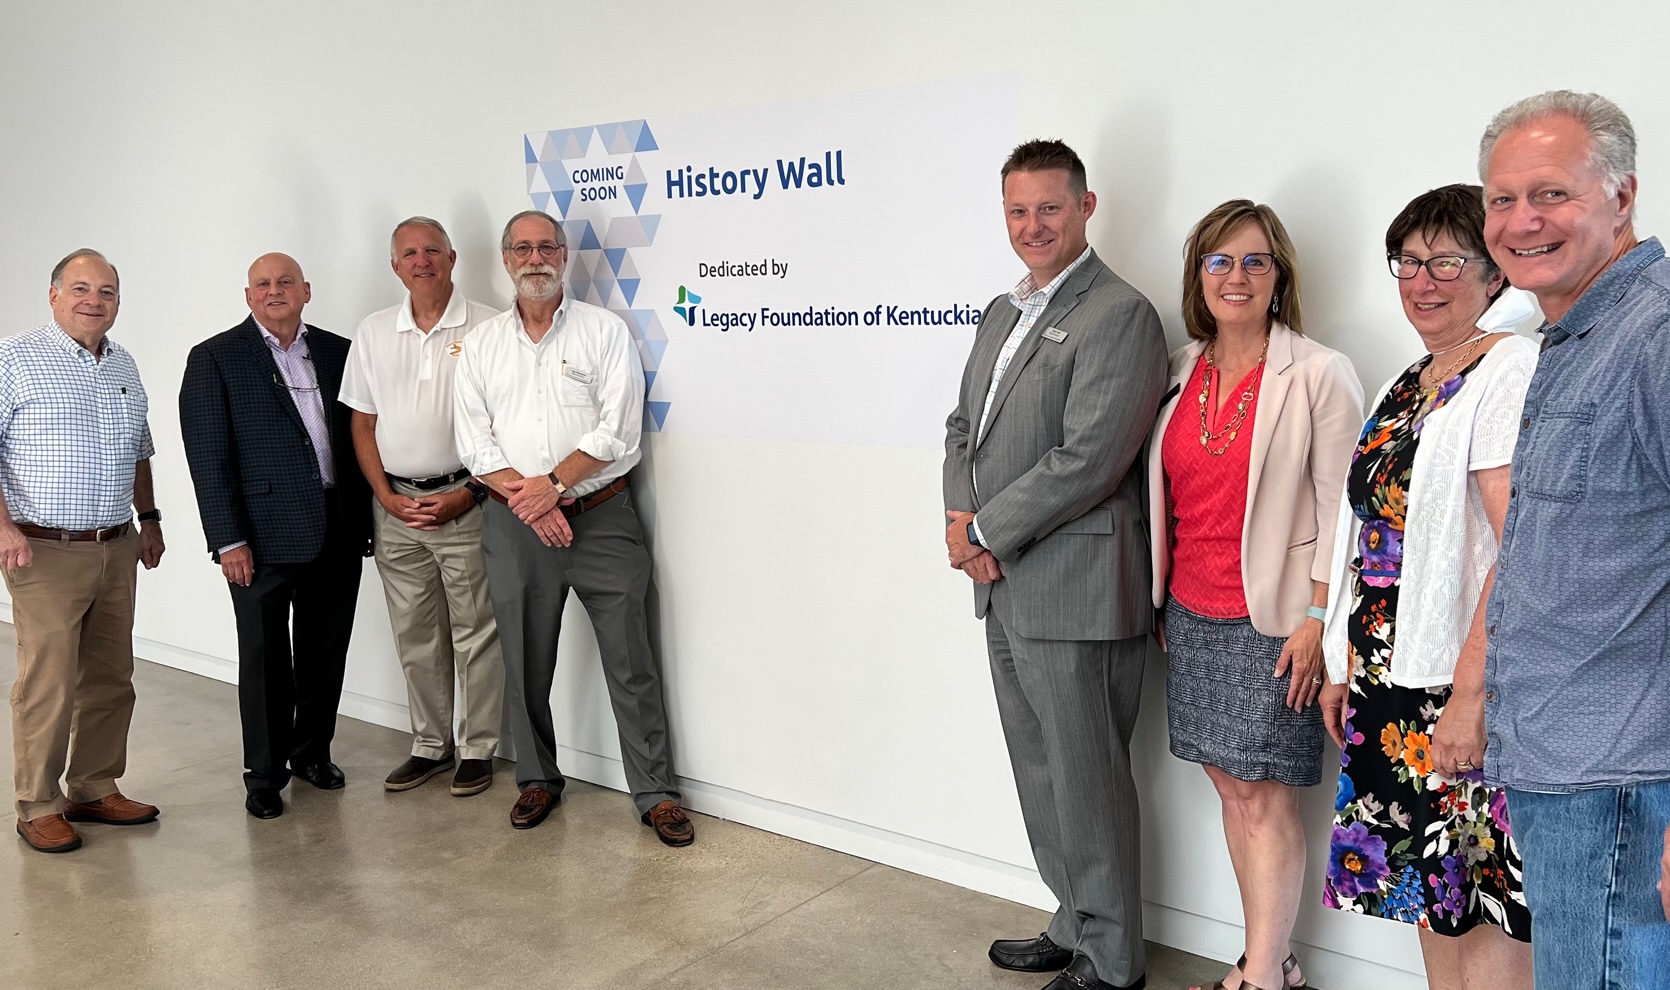 Members of the Board of Directors pose in front of a History Wall at the Jewish Community Center which was funded by a Legacy Foundation of Kentuckiana grant.